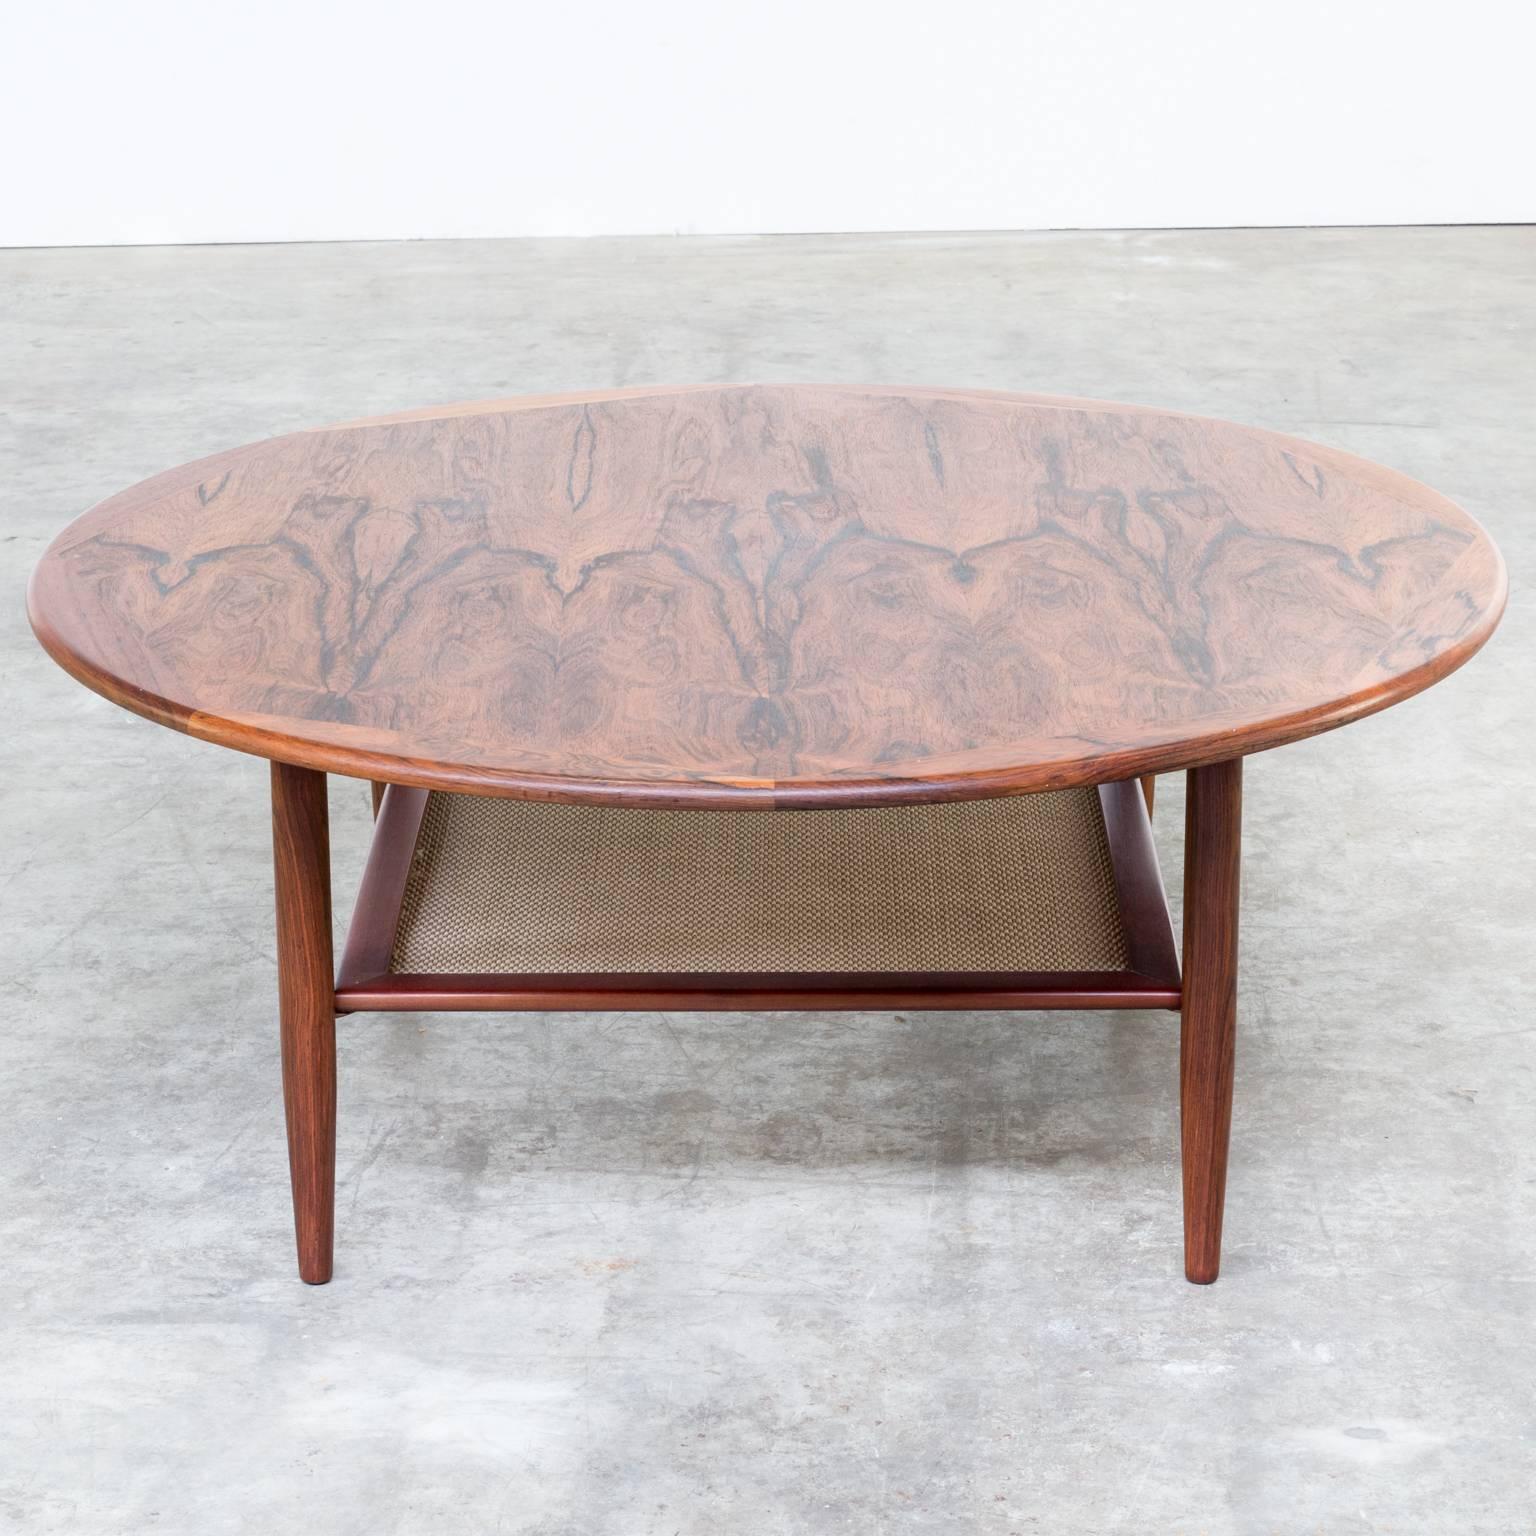 Danish 1970s Rosewood Round Coffee Table, Attributed to Peter Hvidt for France & Son For Sale